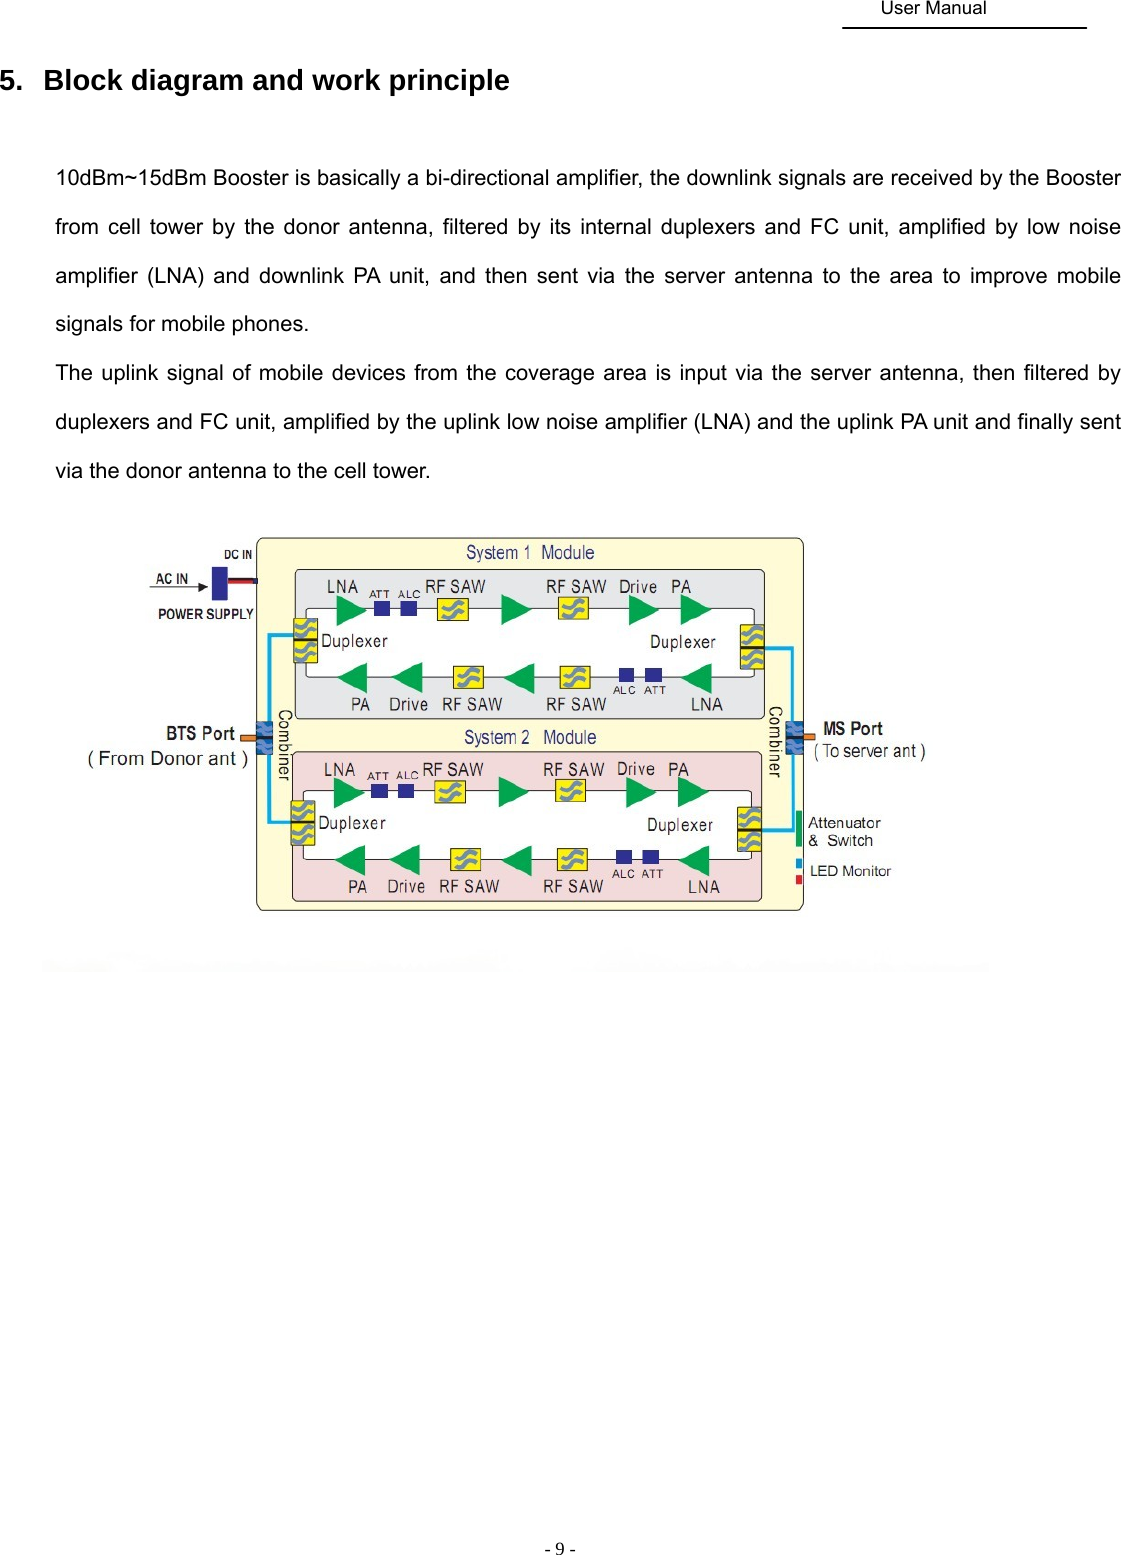                                                                                               User Manual  - 9 -   5.  Block diagram and work principle 10dBm~15dBm Booster is basically a bi-directional amplifier, the downlink signals are received by the Booster from cell tower by the donor antenna, filtered by its internal duplexers and FC unit, amplified by low noise amplifier (LNA) and downlink PA unit, and then sent via the server antenna to the area to improve mobile signals for mobile phones. The uplink signal of mobile devices from the coverage area is input via the server antenna, then filtered by duplexers and FC unit, amplified by the uplink low noise amplifier (LNA) and the uplink PA unit and finally sent via the donor antenna to the cell tower.              